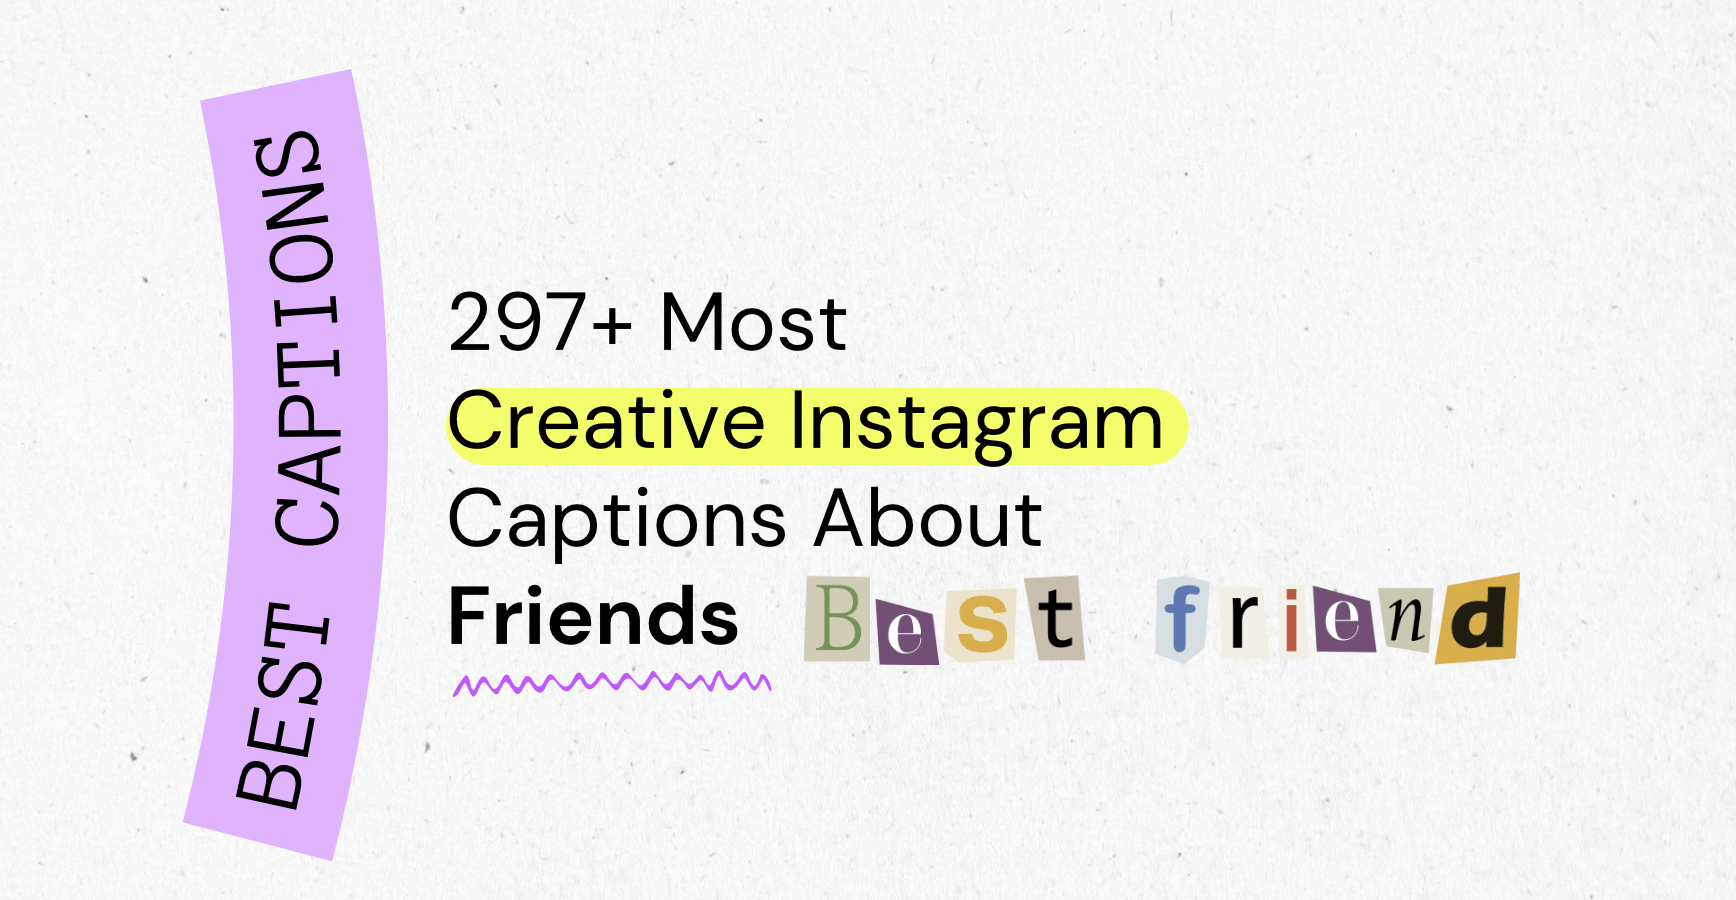 81 Best Christmas Captions For Instagram to Help Drive Sales